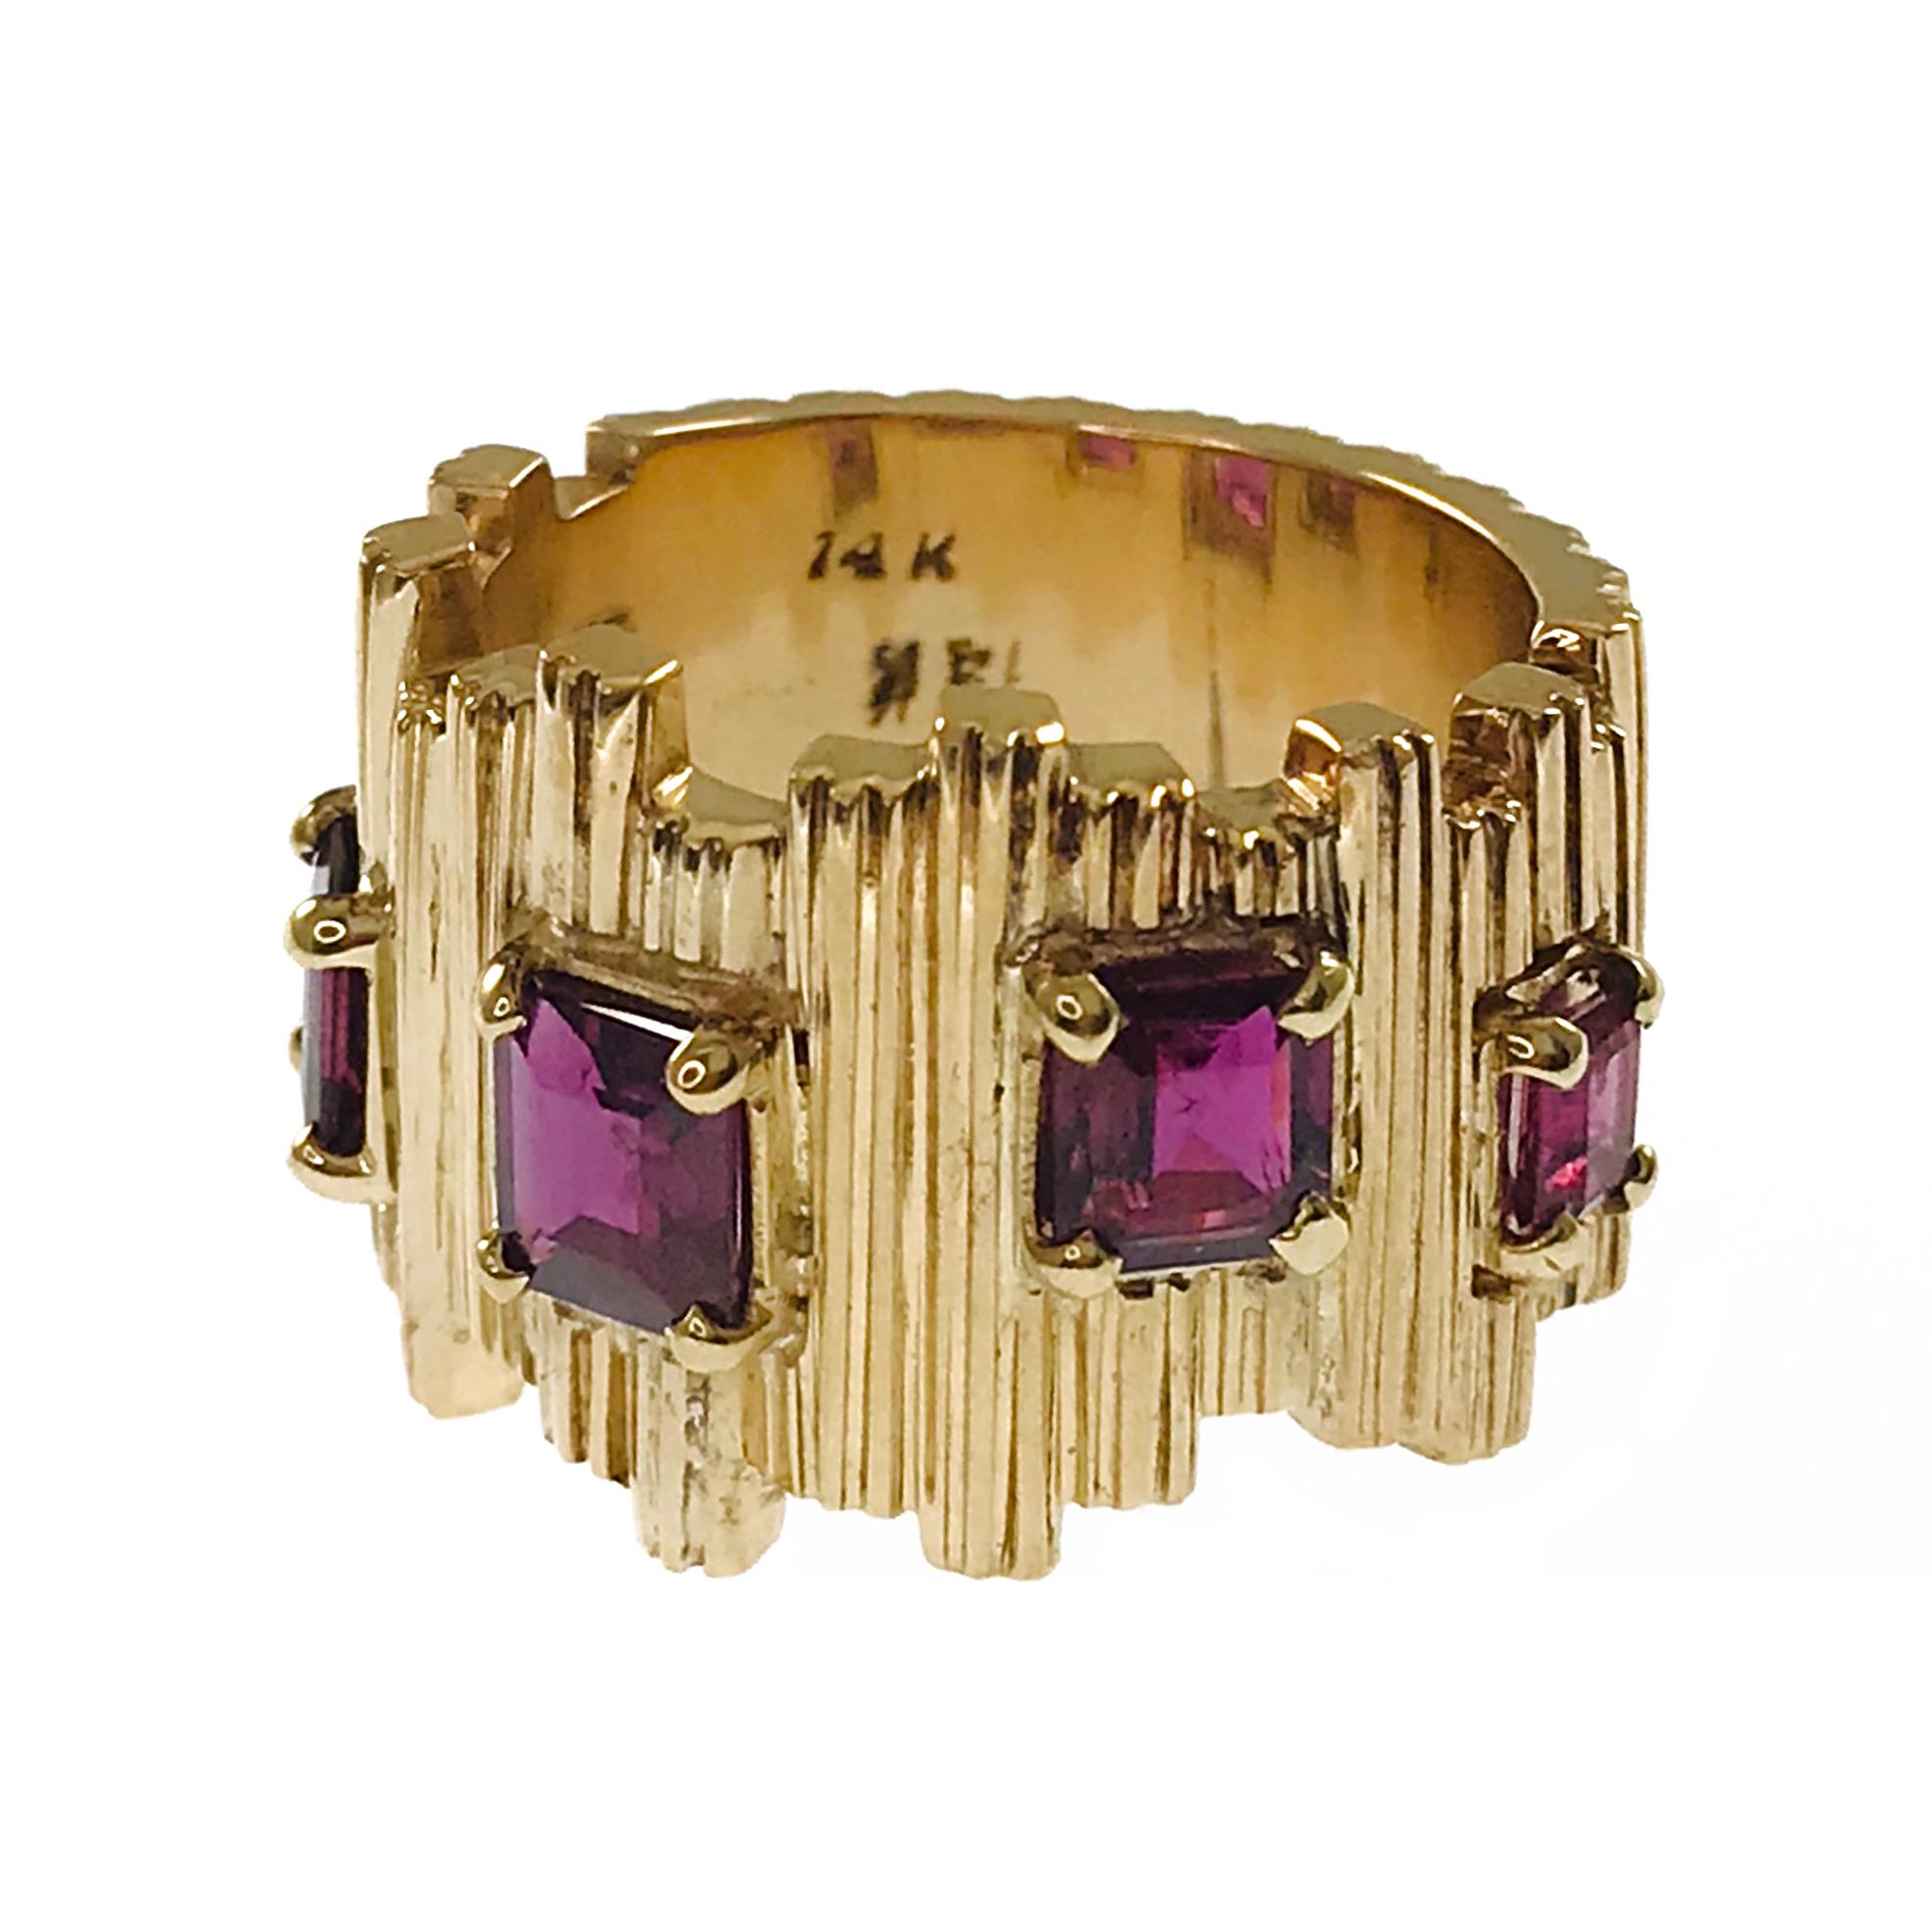 14 Karat Rubellite Tourmaline Ring. The highly textured wide band ring features five Emerald-cut Tourmaline gemstones around half of the ring. The ring is 10mm x 16.2mm. Three Tourmalines measure 4.5mm - 5.5mm for a total carat weight of 1.50ctw and